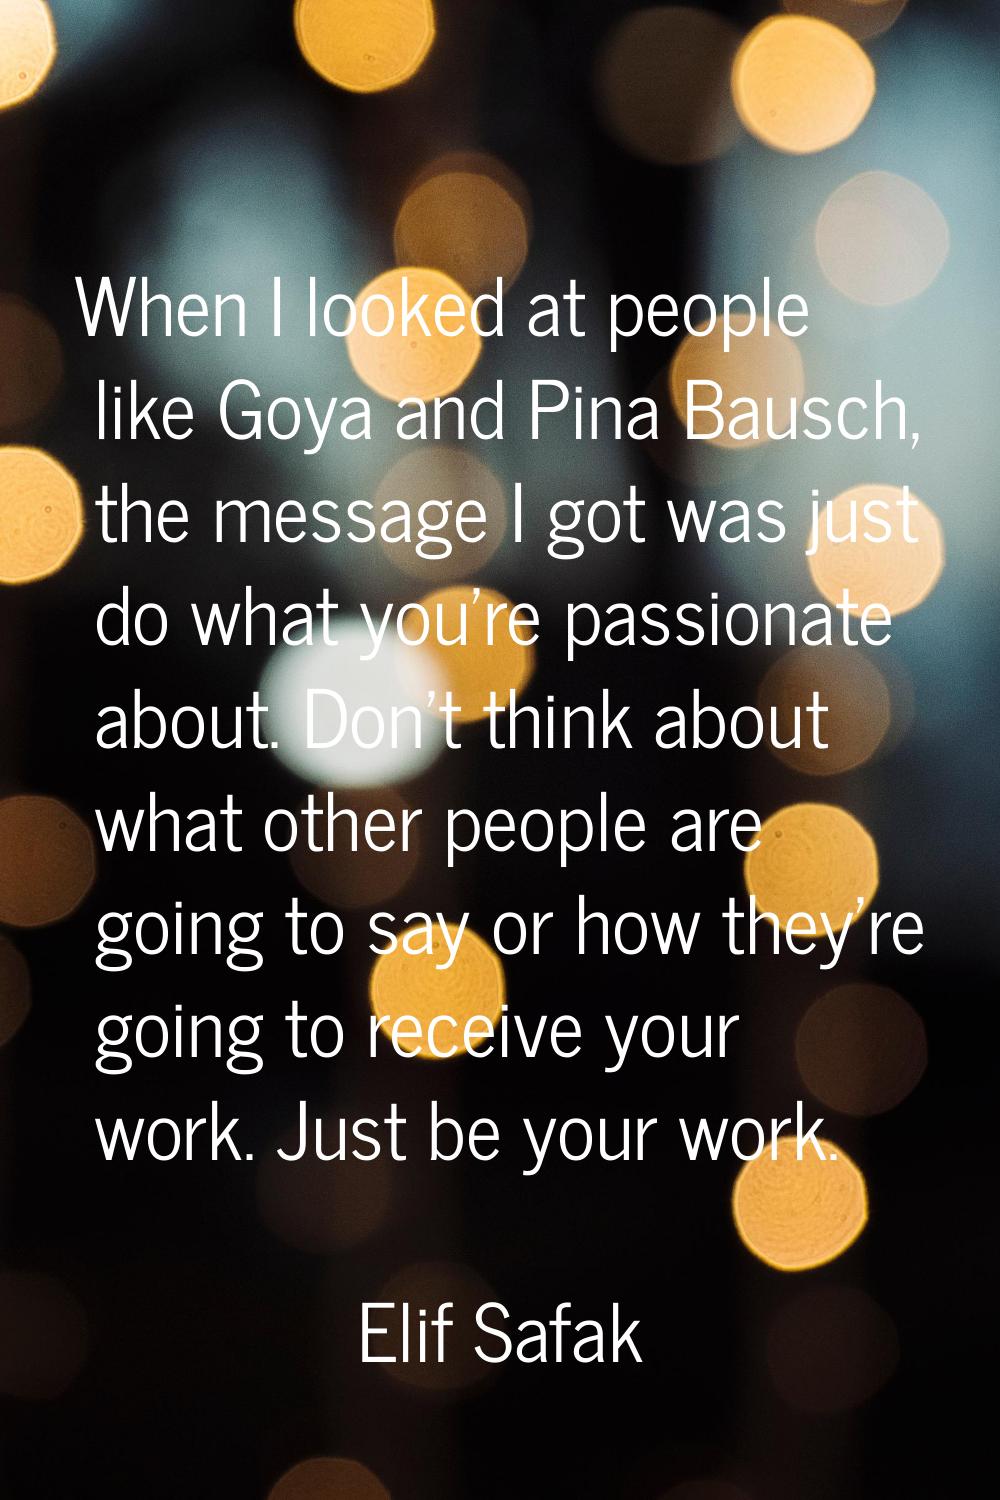 When I looked at people like Goya and Pina Bausch, the message I got was just do what you're passio